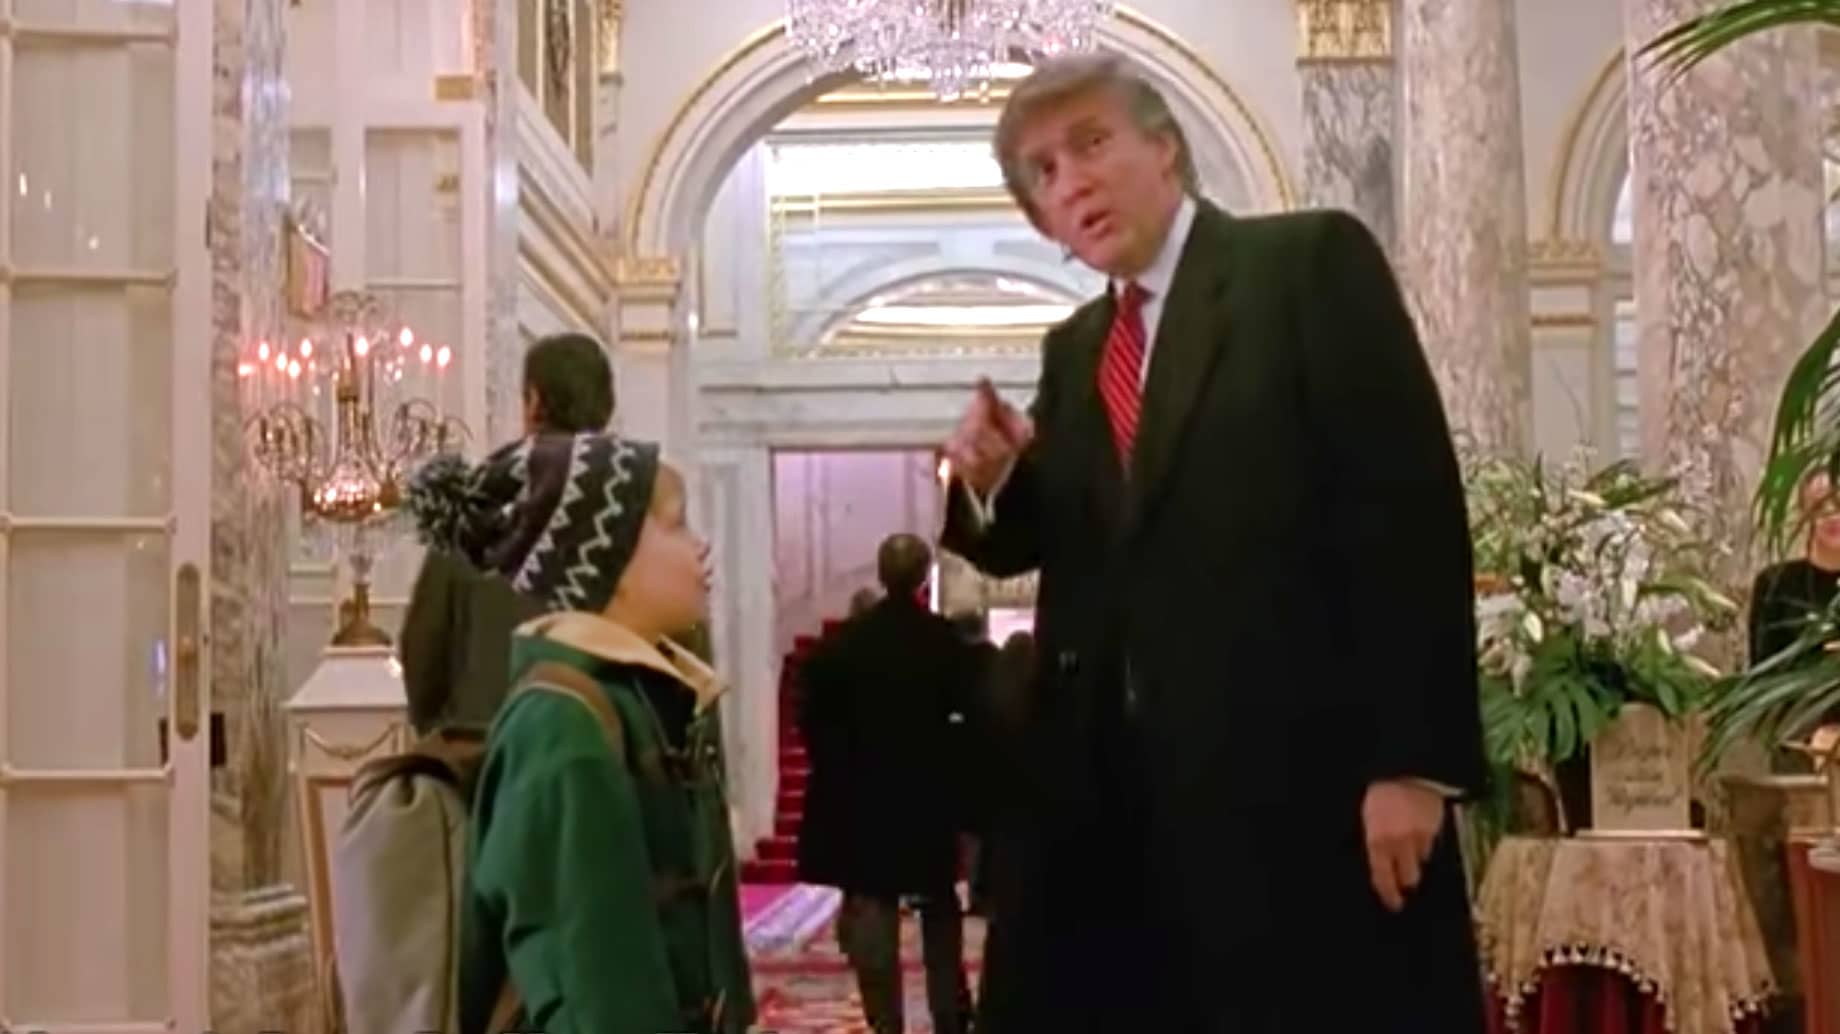 Home Alone 2 TV version edited years before Trump was elected, CBC ...